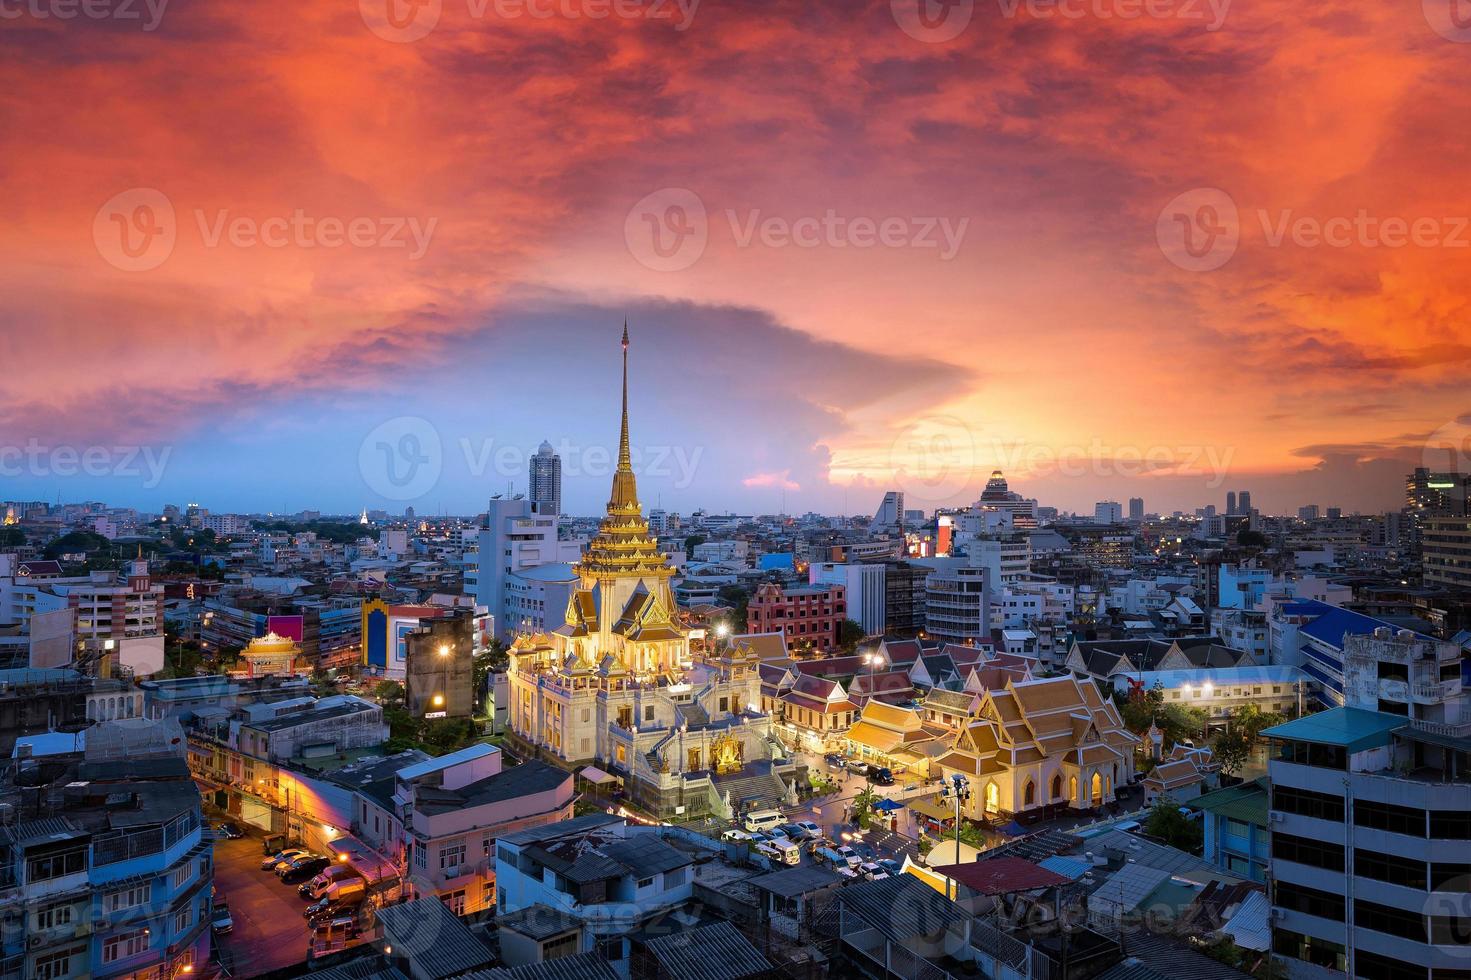 Landscape view of Wat Traimit Witthayaram Worawihan attractive bangkok's temple for tourism at sunset. Temple of the Biggest Golden Buddha in Bangkok, Thailand photo